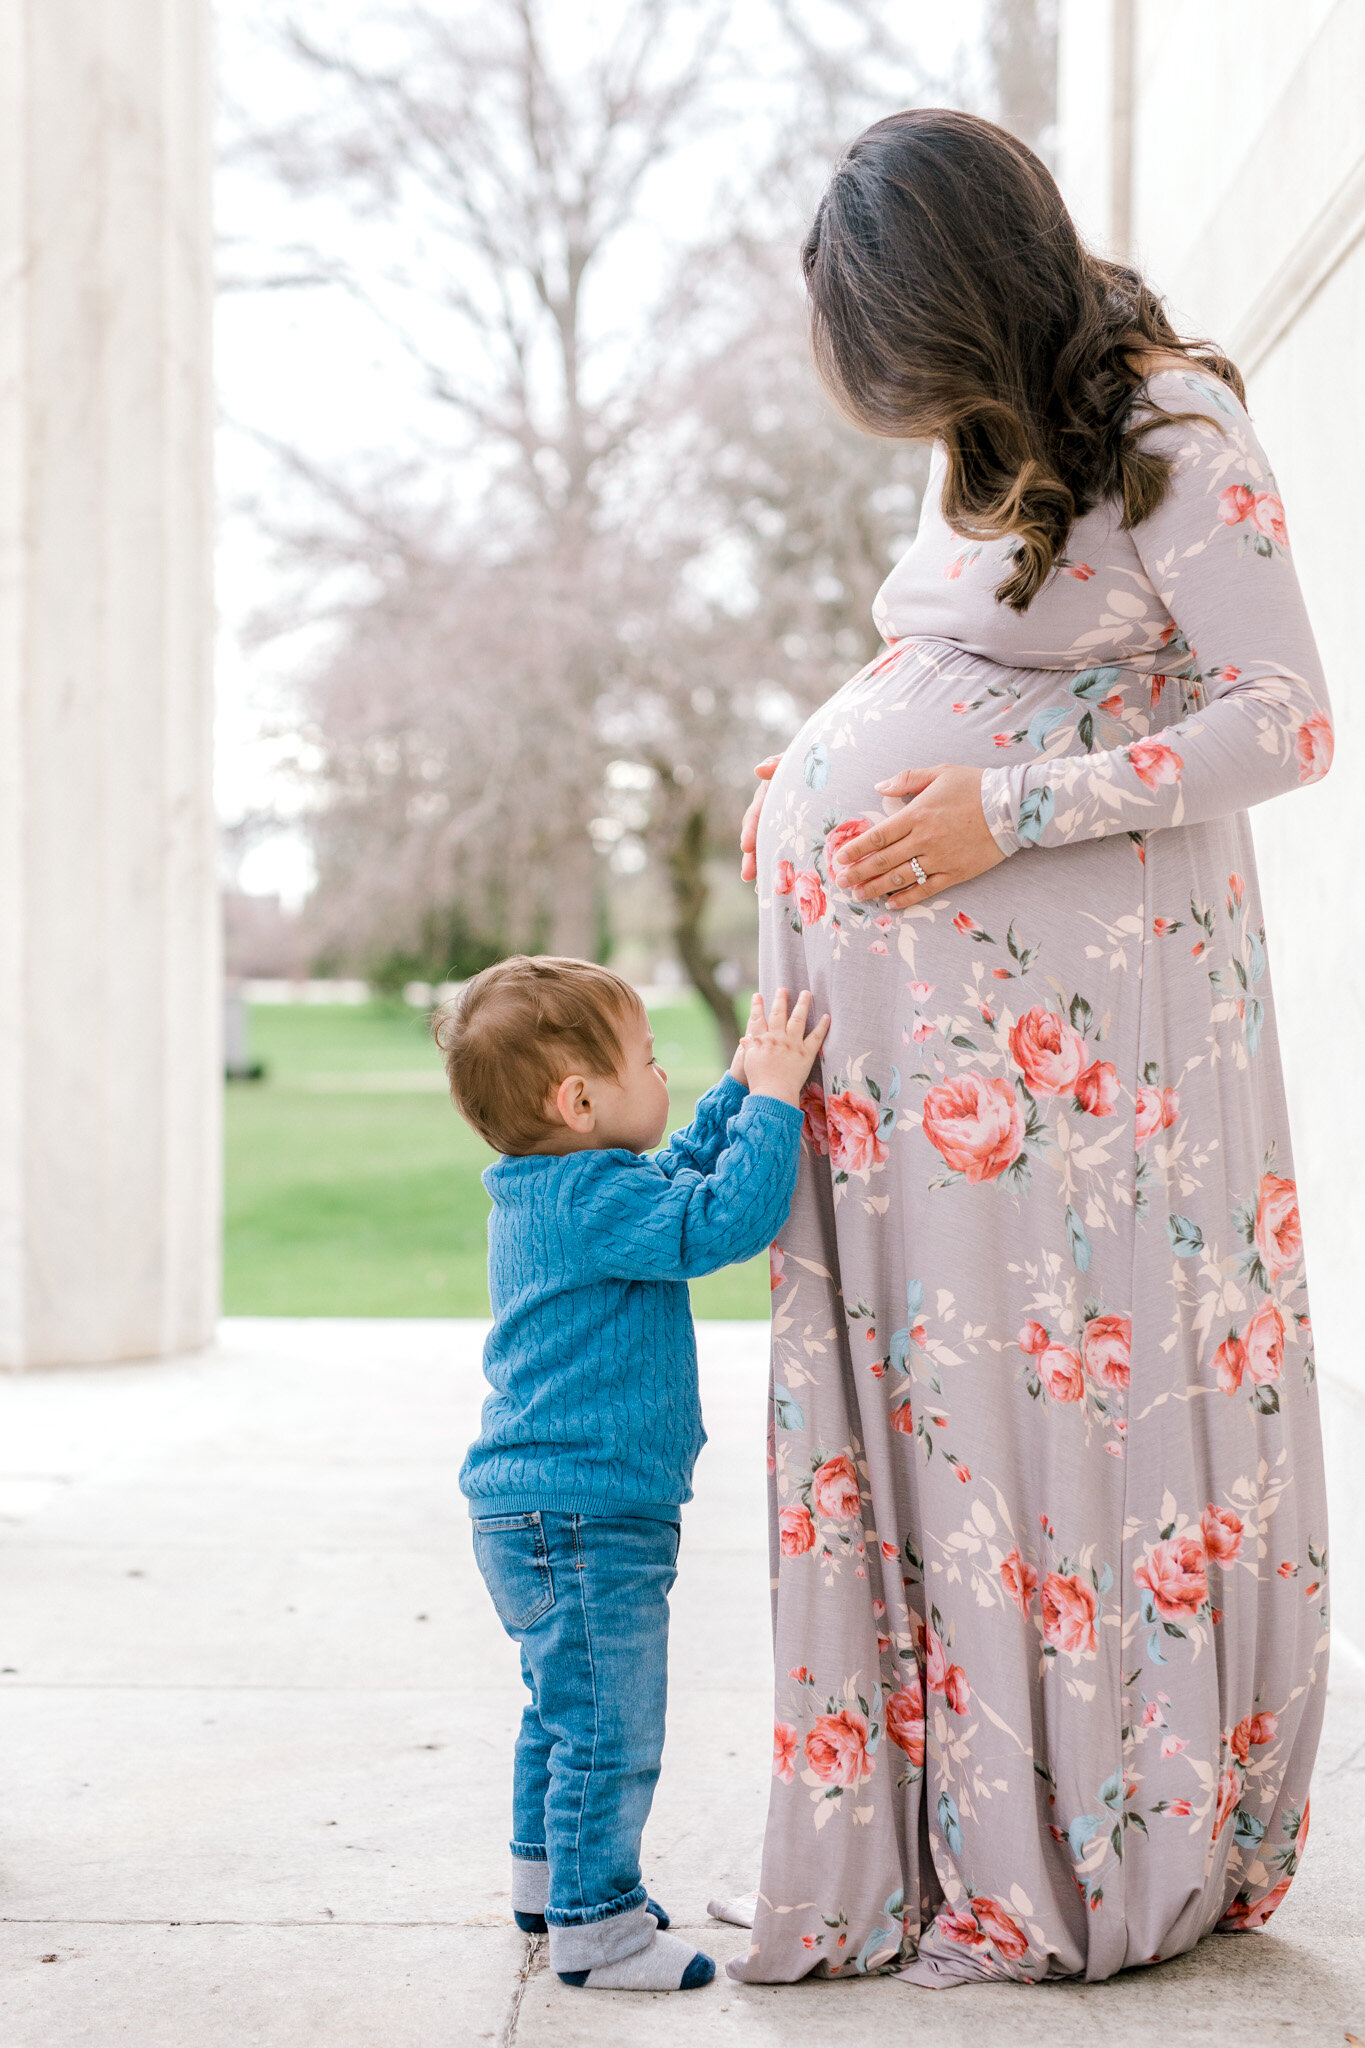 Spring Maternity Session | Light &amp; Airy Maternity Session Outdoor | Marble Pillars | West Michigan Maternity Photographer